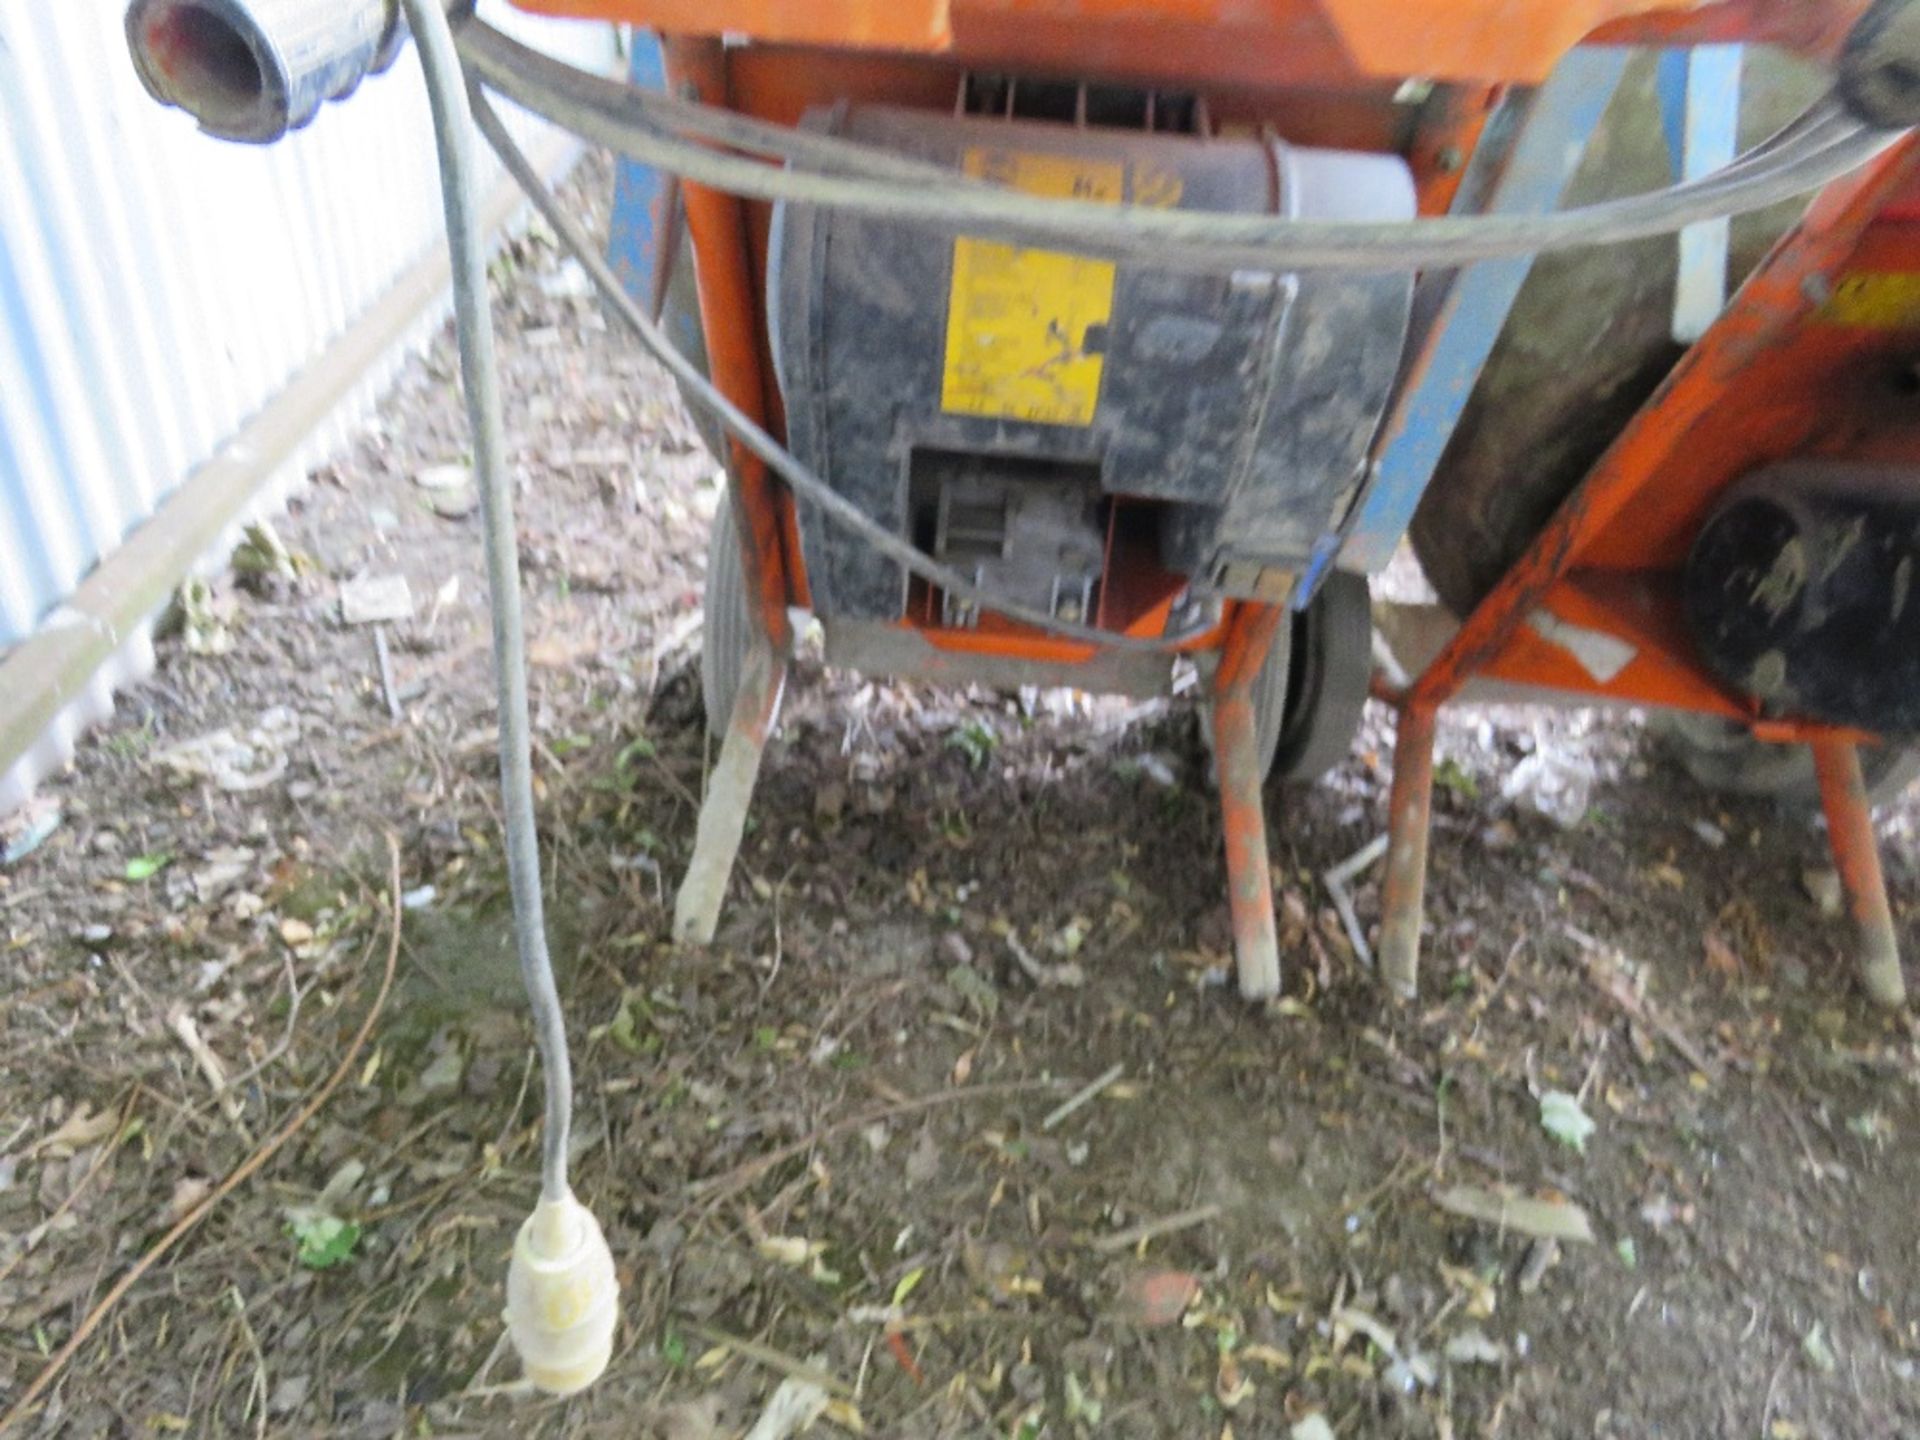 BELLE 110VOLT MINI MIXER WITH STAND. DIRECT FROM A LOCAL GROUNDWORKS COMPANY AS PART OF THEIR RES - Image 4 of 4